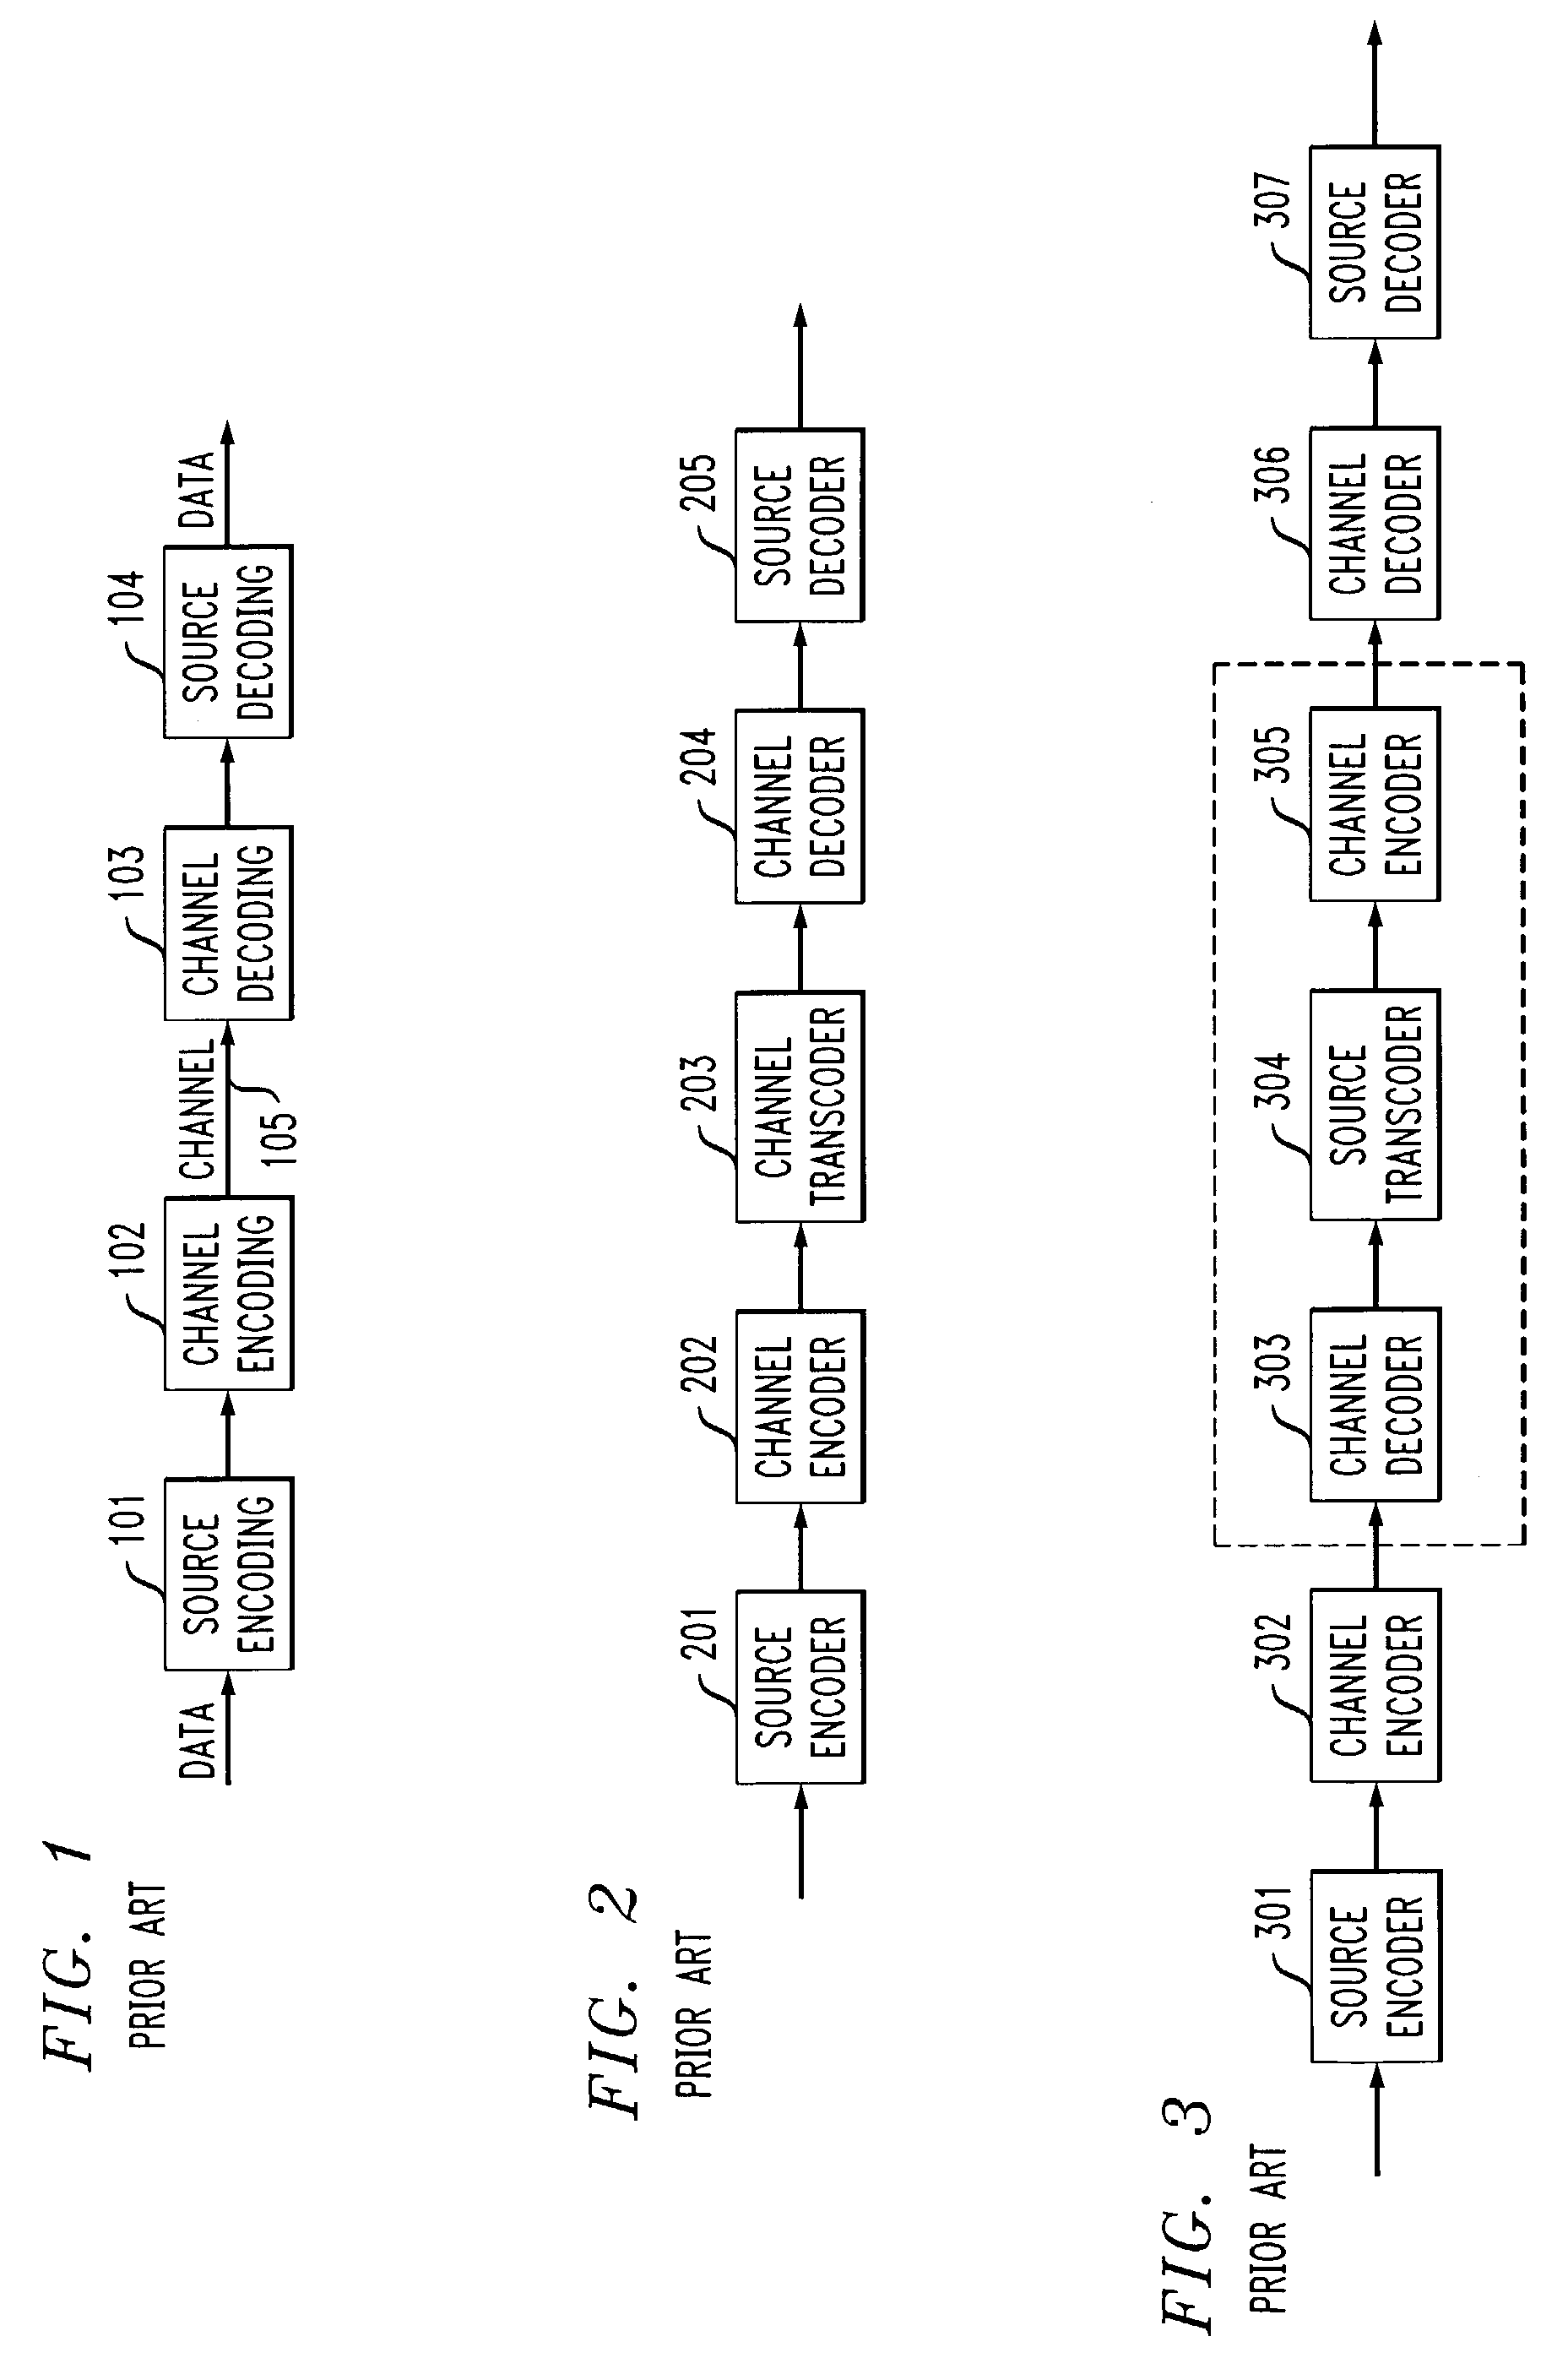 Method and apparatus for networked information dissemination through secure transcoding